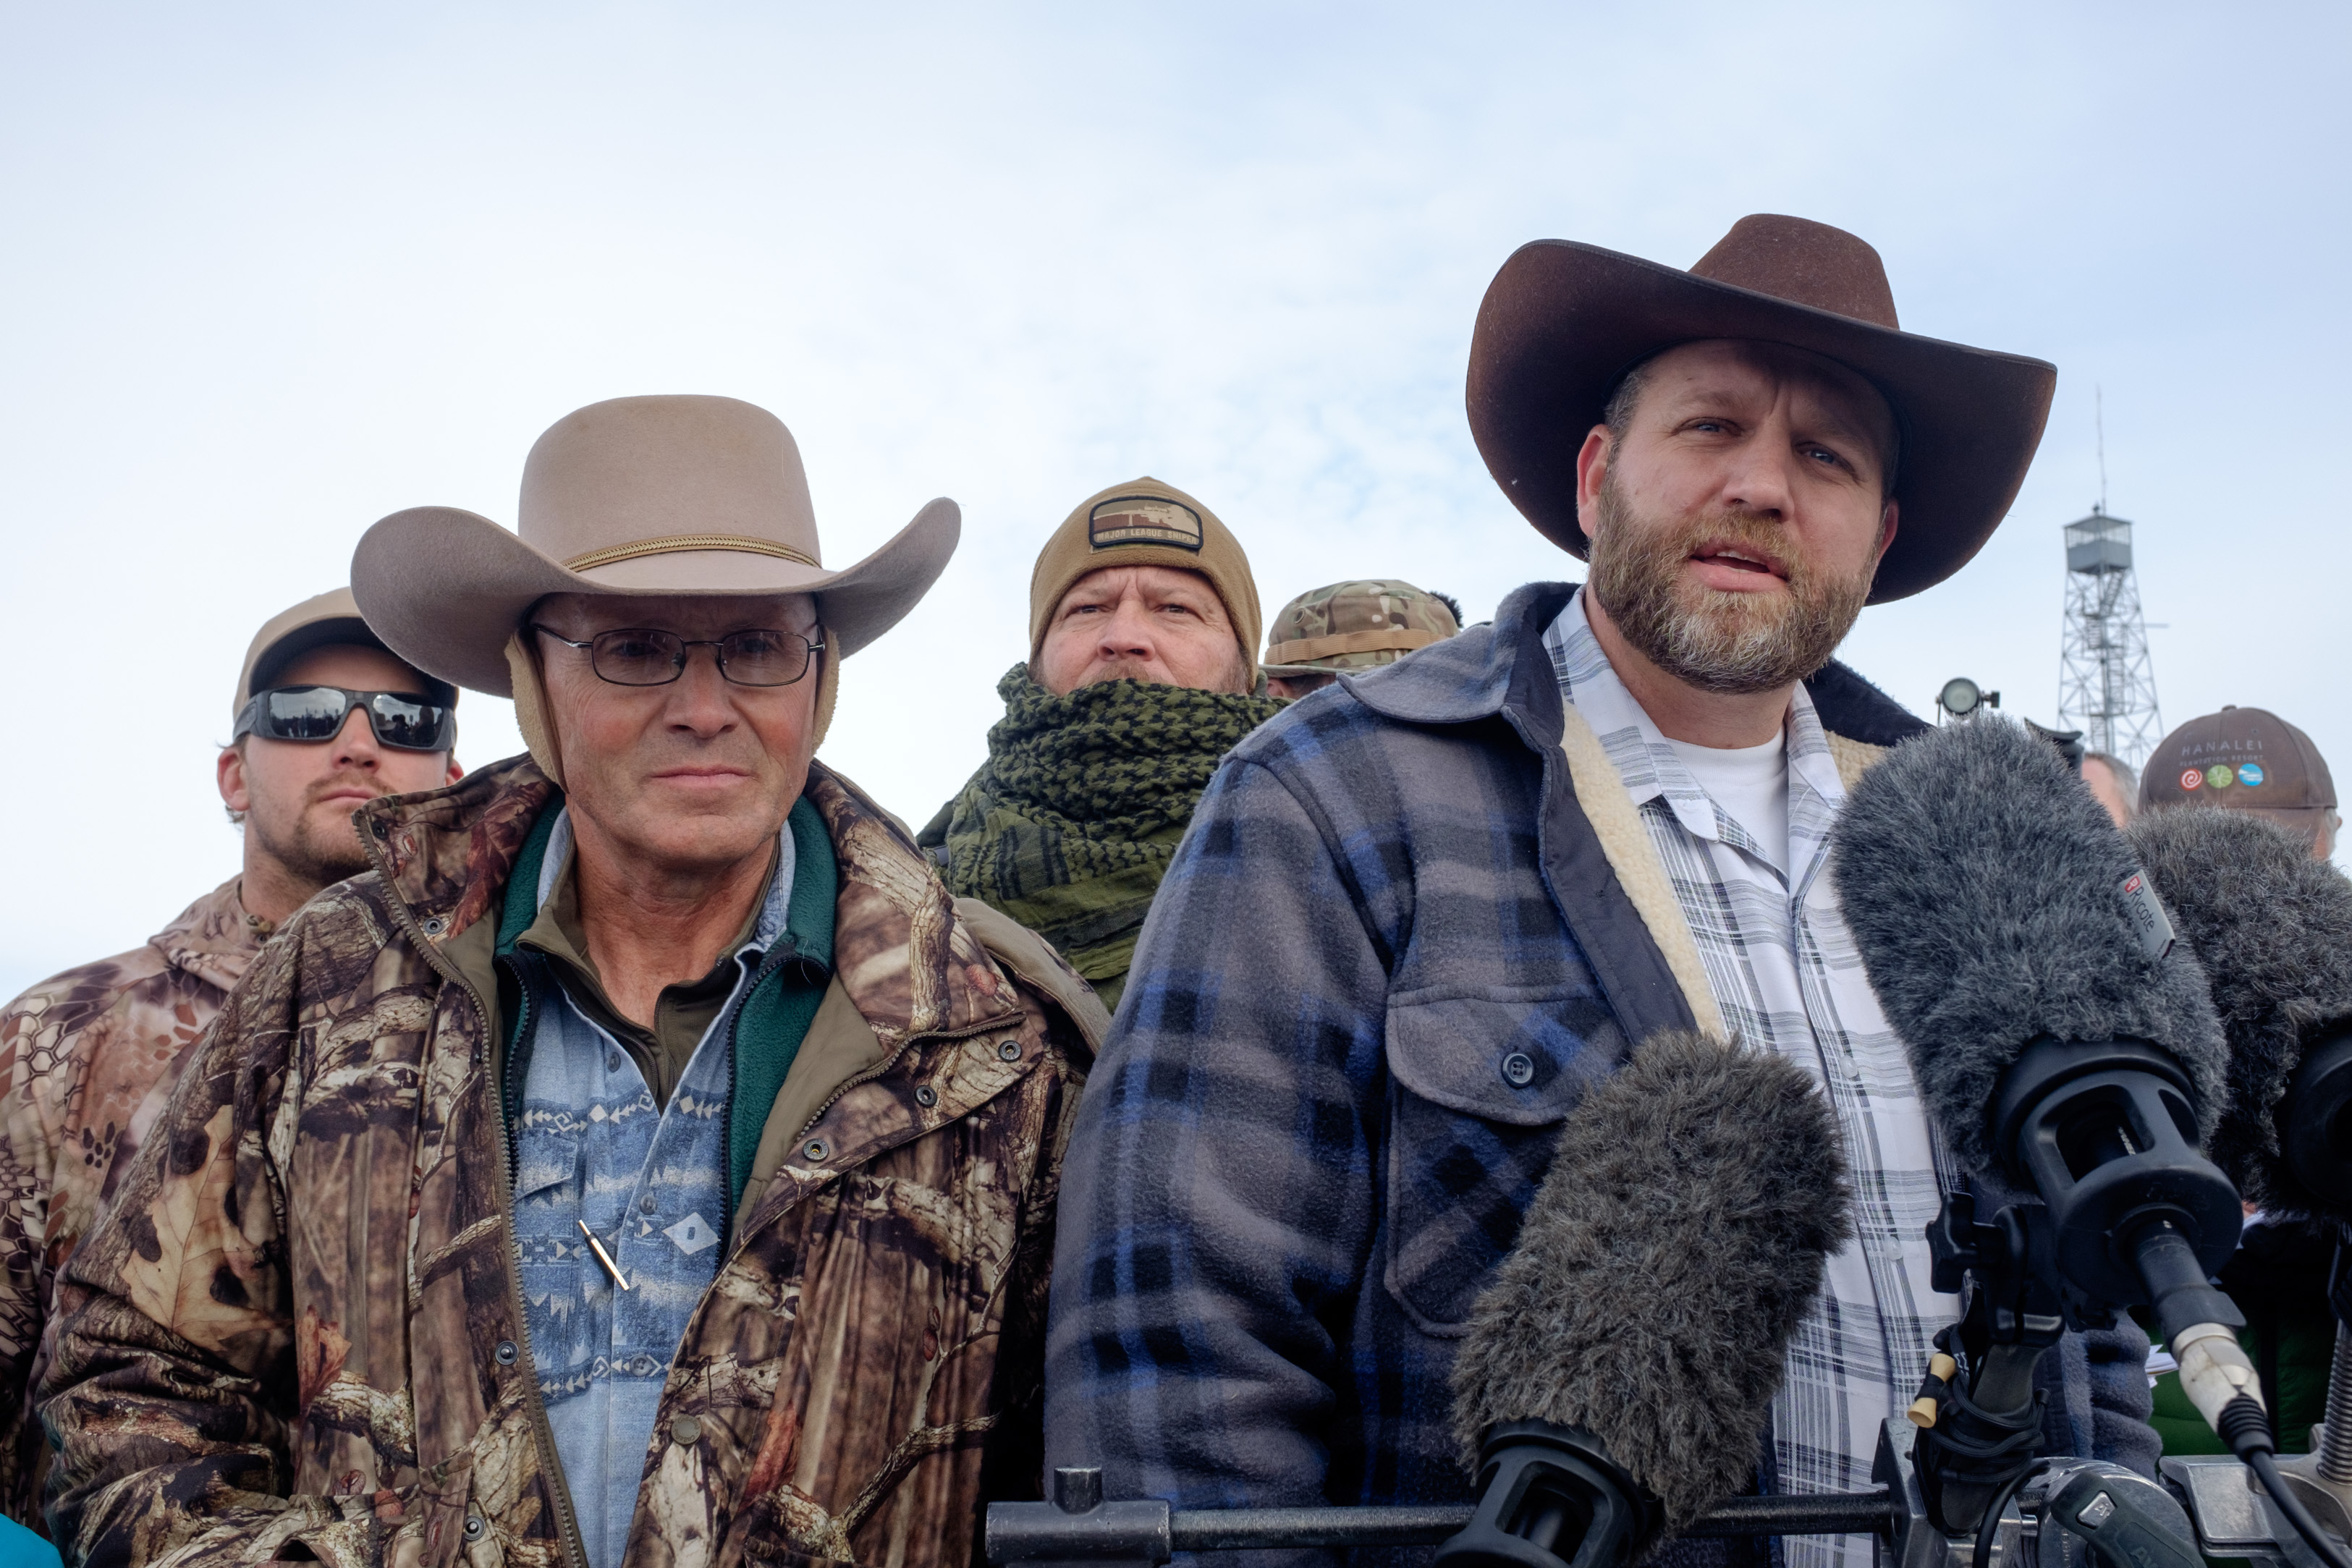 Ammon Bundy(R), leader of a group of armed anti-government protesters speaks to the media as other members look on at the Malheur National Wildlife Refuge near Burns, Ore., on Jan. 4, 2016. (Rob Kerr—AFP/Getty Images)